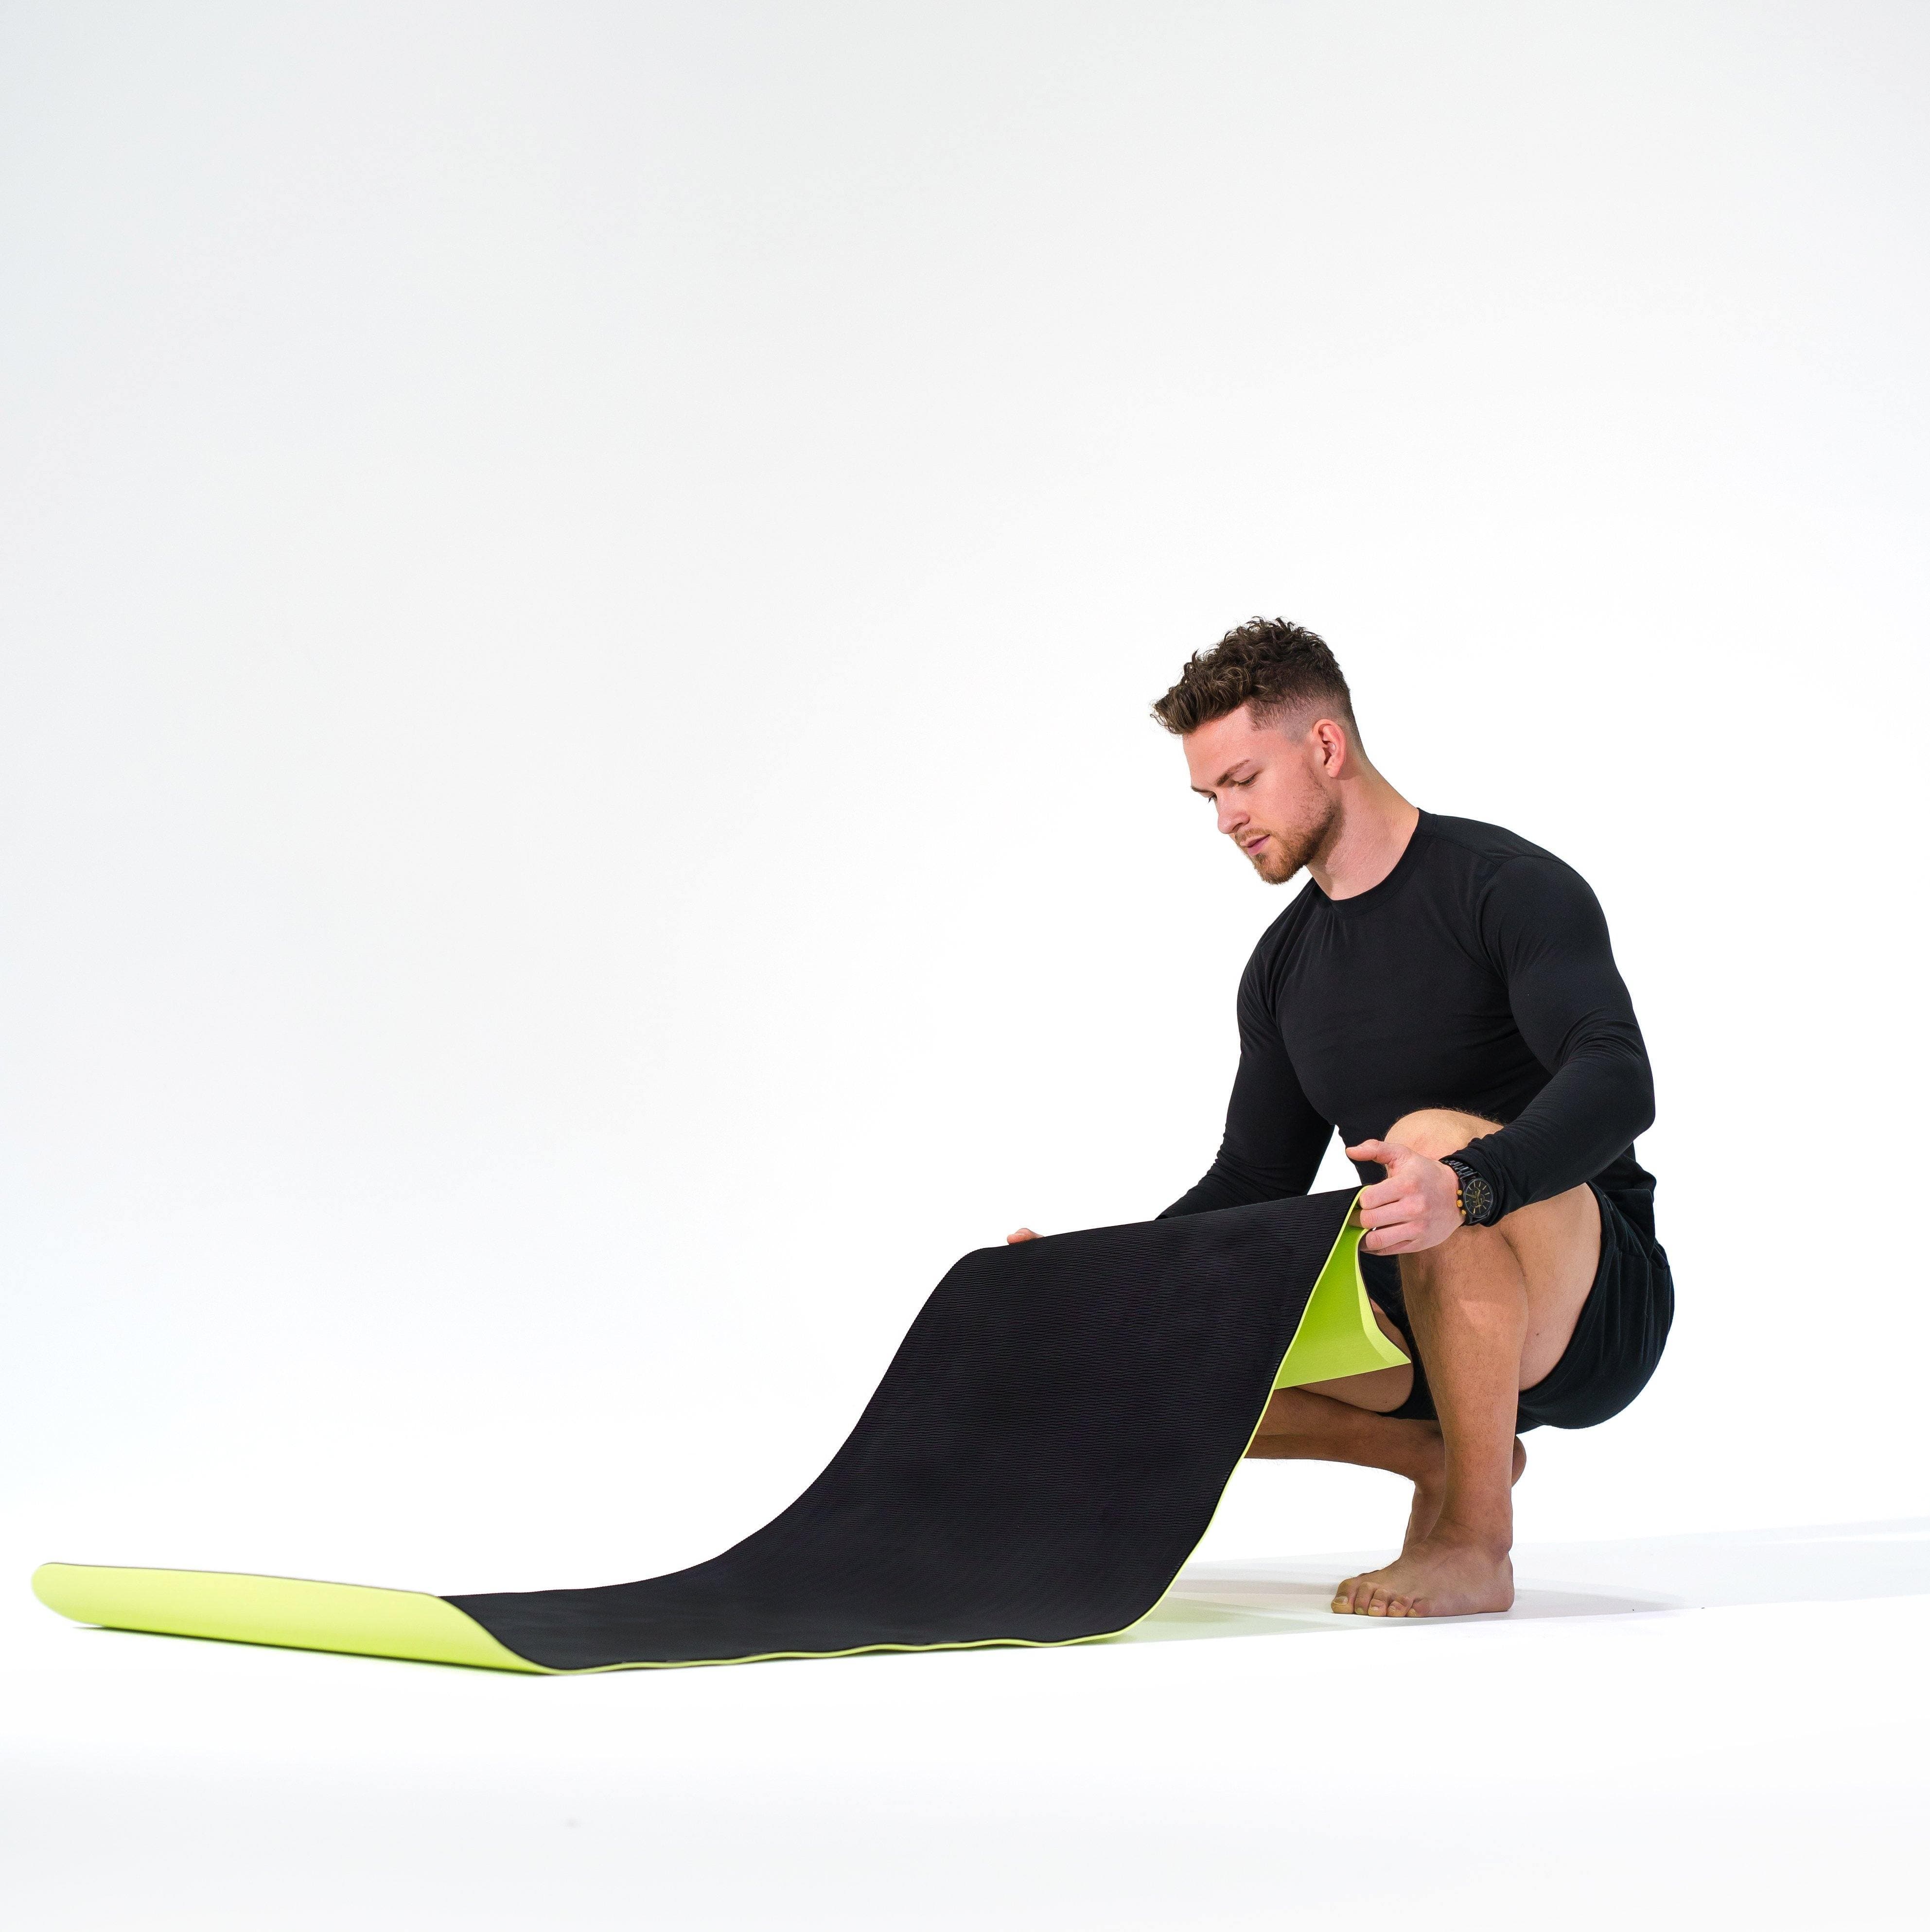 Man modeling the Redge Fit Double Sided Workout Mat Available at https://www.getredge.com/products/redge-double-sided-workout-mat